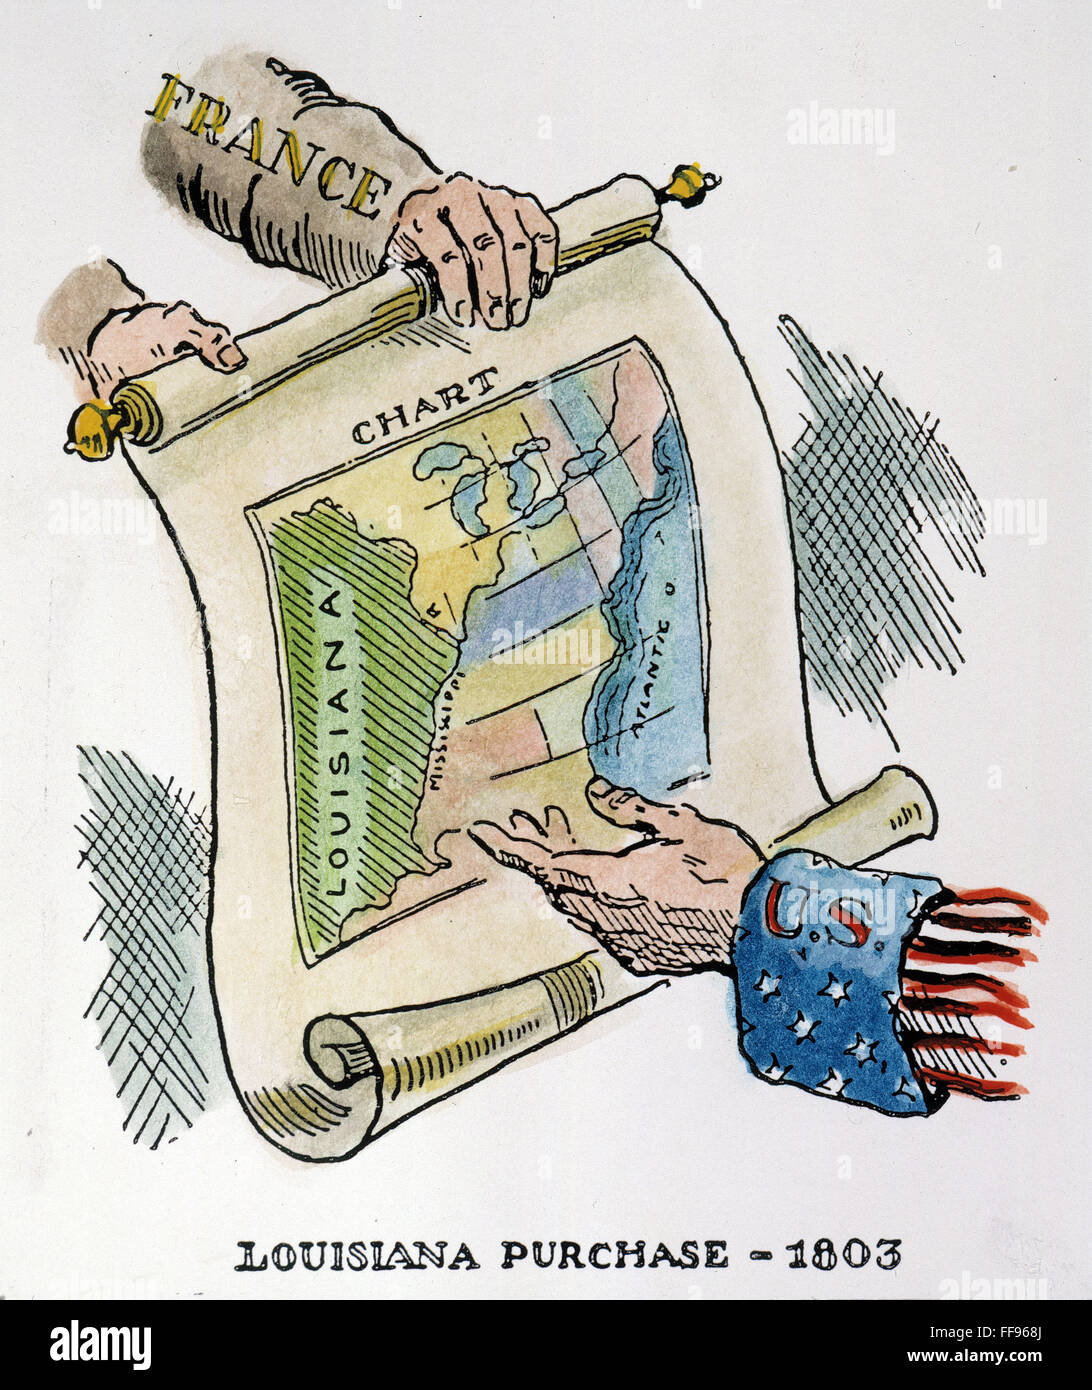 LOUISIANA PURCHASE, 1803. /nAmerican cartoon, c1900, on the purchase of Louisiana by the United States from France. Stock Photo